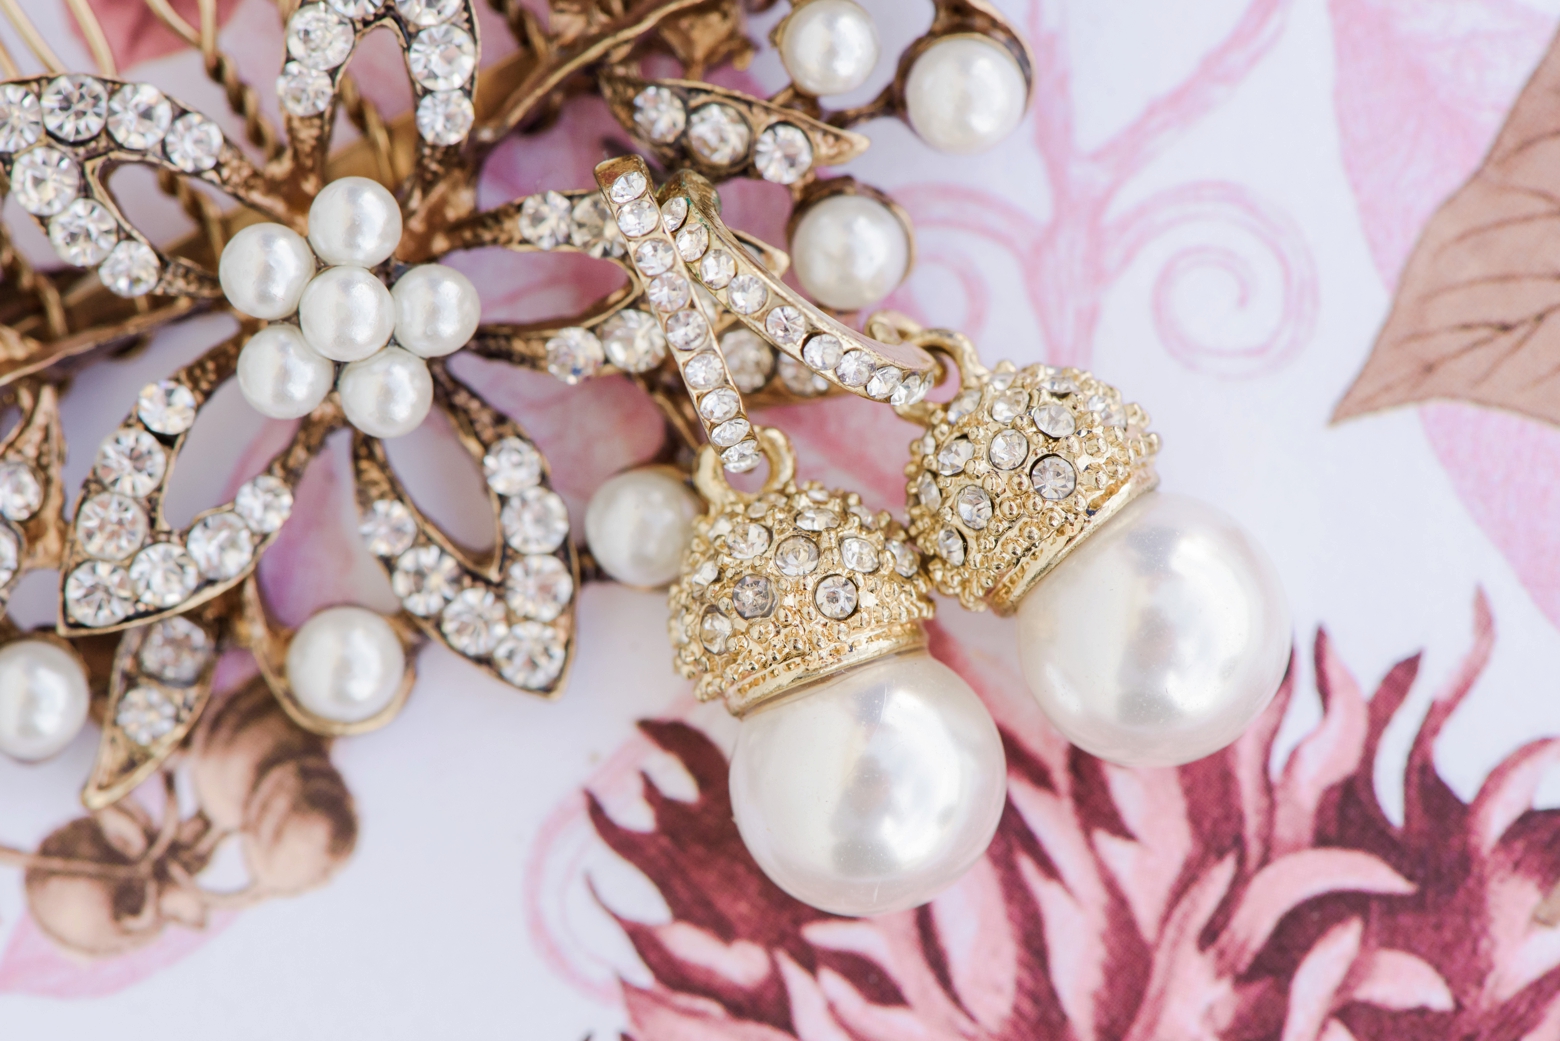 Close-up detail of the Bridal jewellery against a floral background by Sarah and Ben Photography